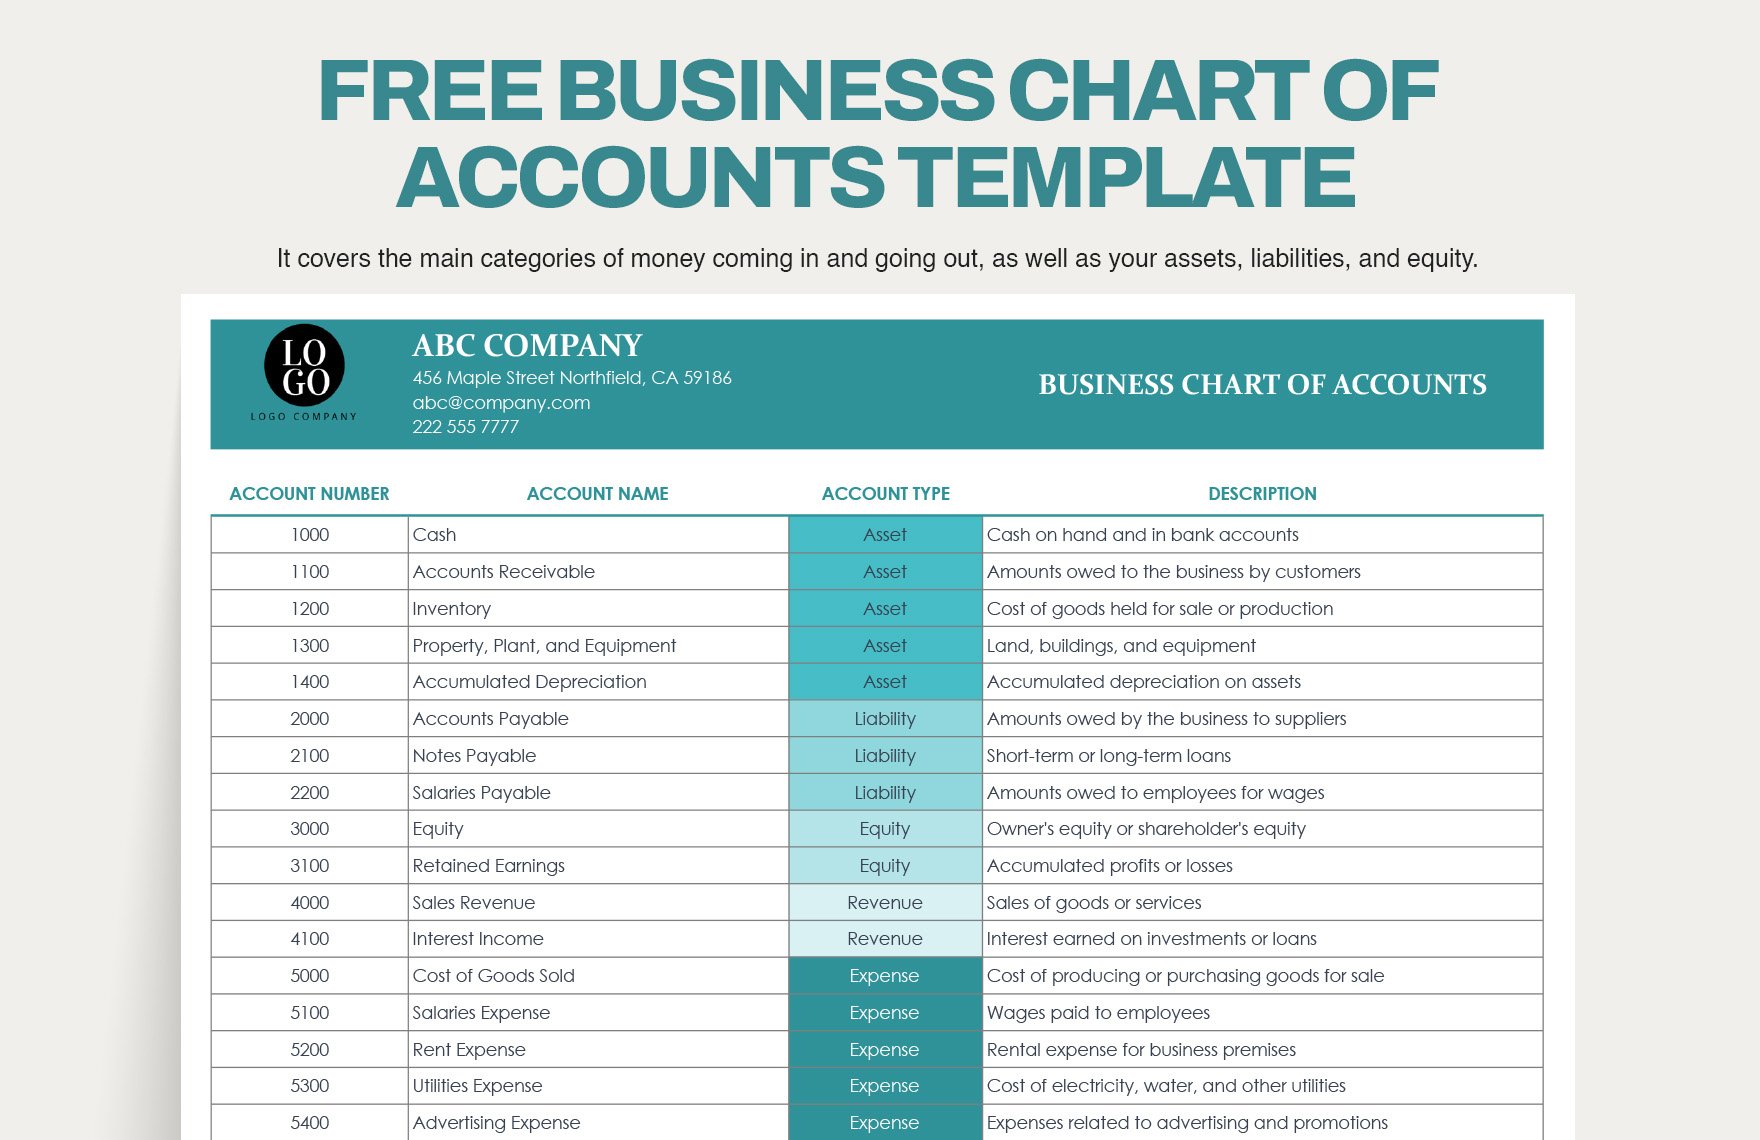 Business Chart of Accounts Template